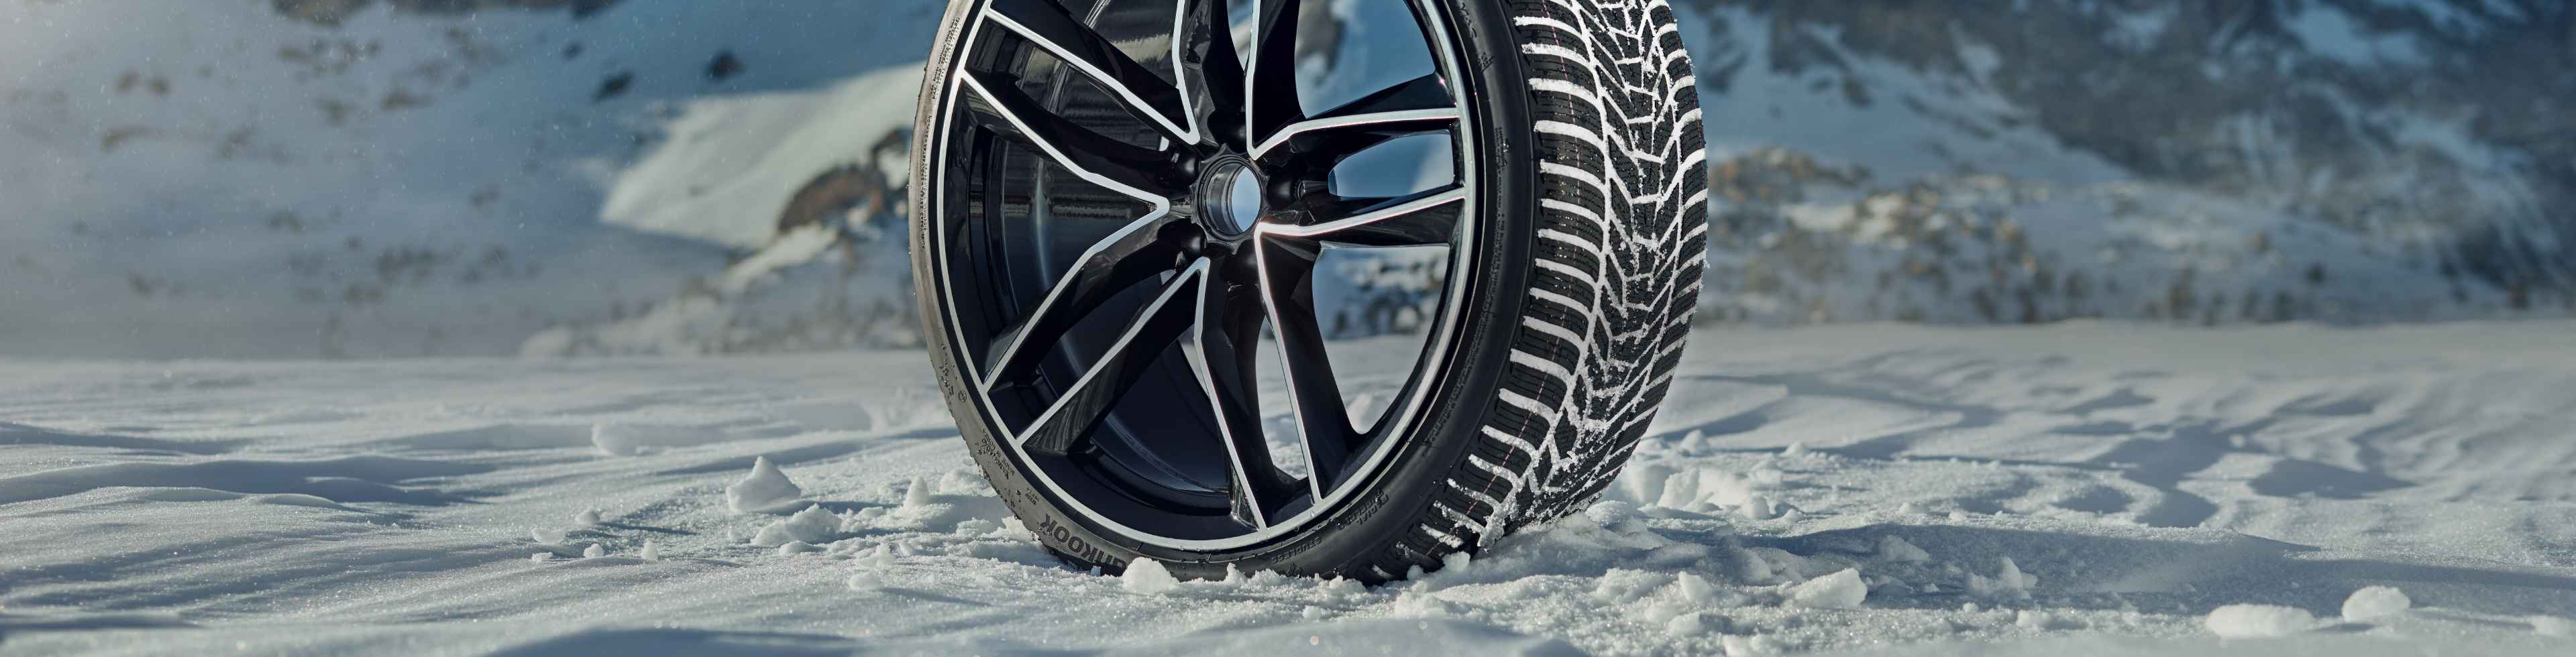 Winter I*cept Tire - Search By Product Family | Hankook Tire USA